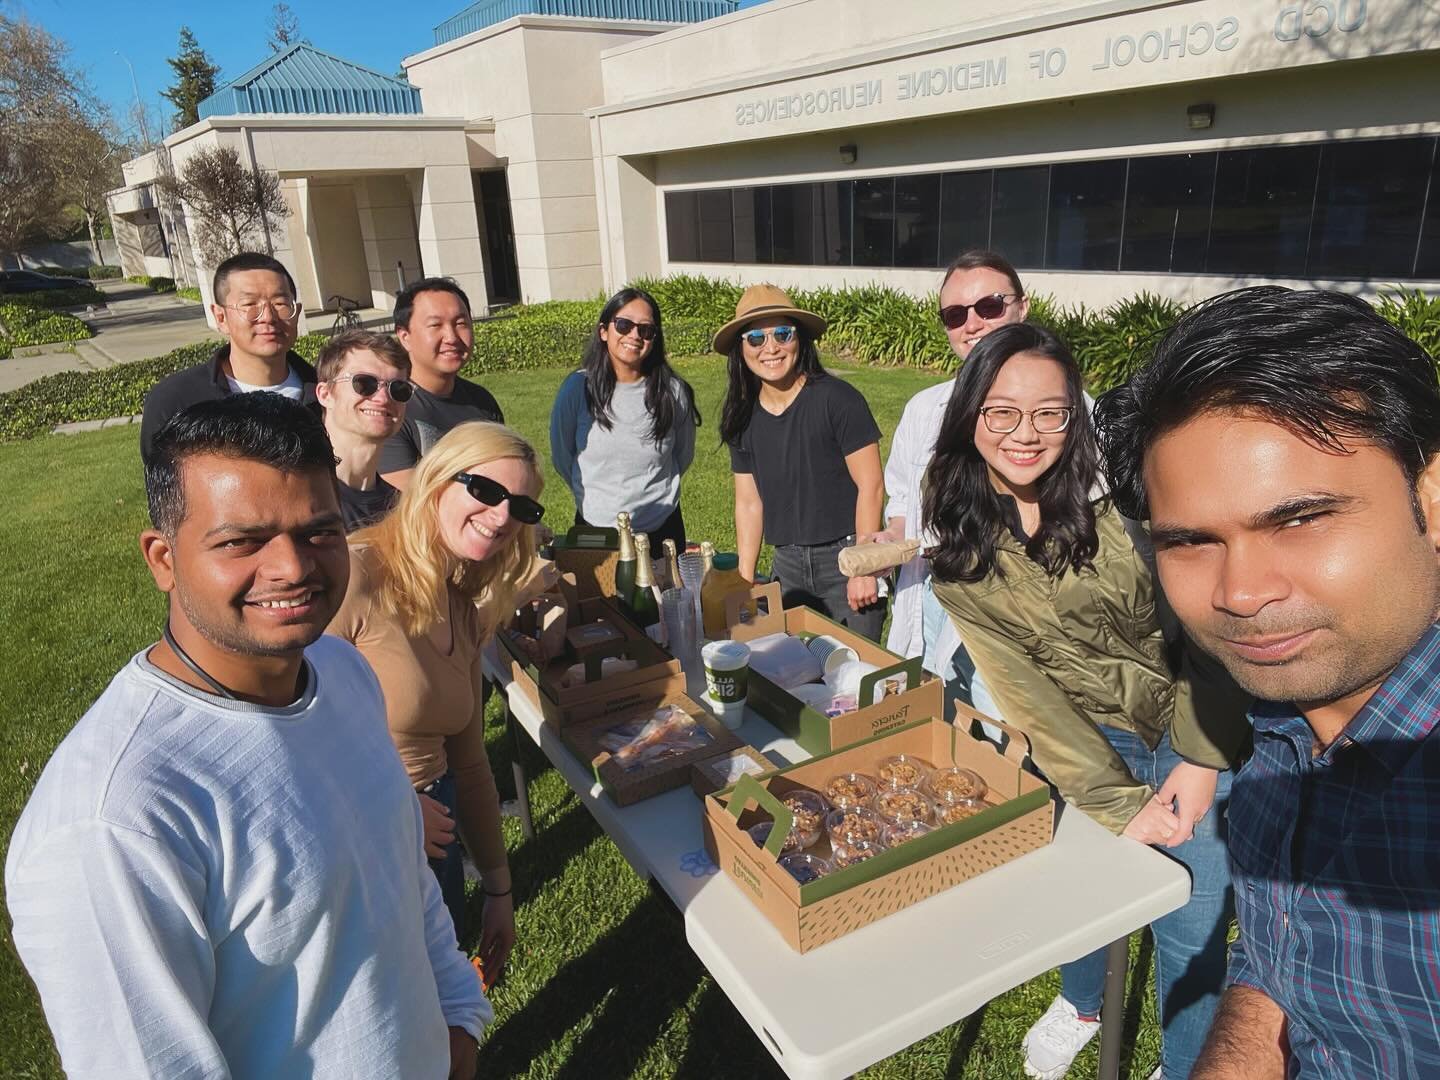 As we march towards May, here&rsquo;s a Kim Lab Celebration post for awesome things lab members have achieved the past few months since January!!! (Pictures show lab celebrating via brunch on grass sponsored by Tina!) 

Congratulations to 

1. ⭐️Run!